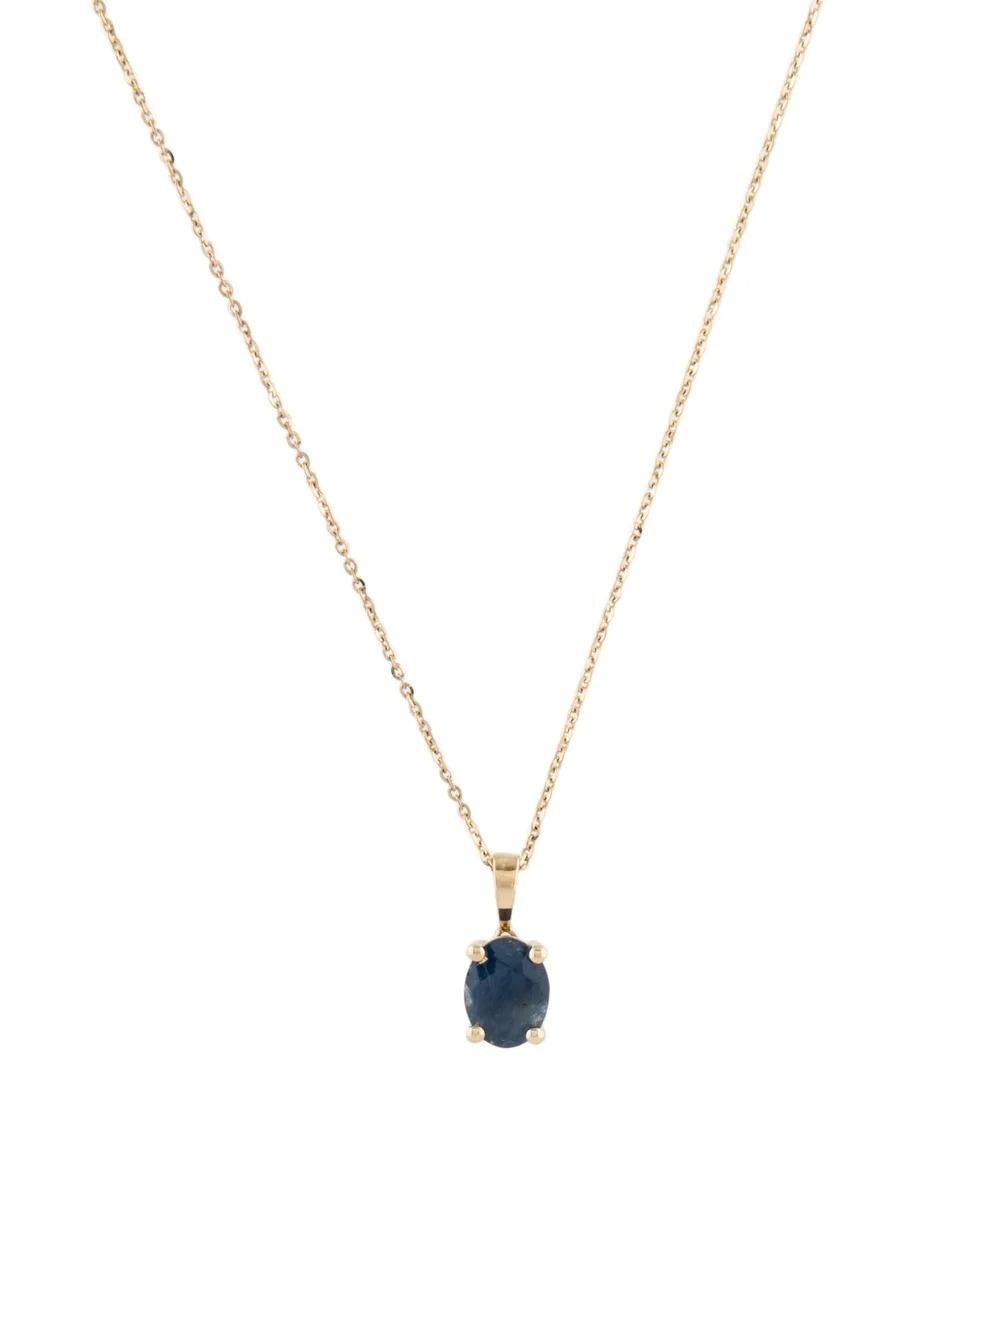 Elevate your style with this exquisite 14K yellow gold pendant necklace featuring a captivating oval modified brilliant sapphire. Crafted to perfection, this necklace exudes sophistication and timeless beauty.

Specifications:

* Metal Type: 14K